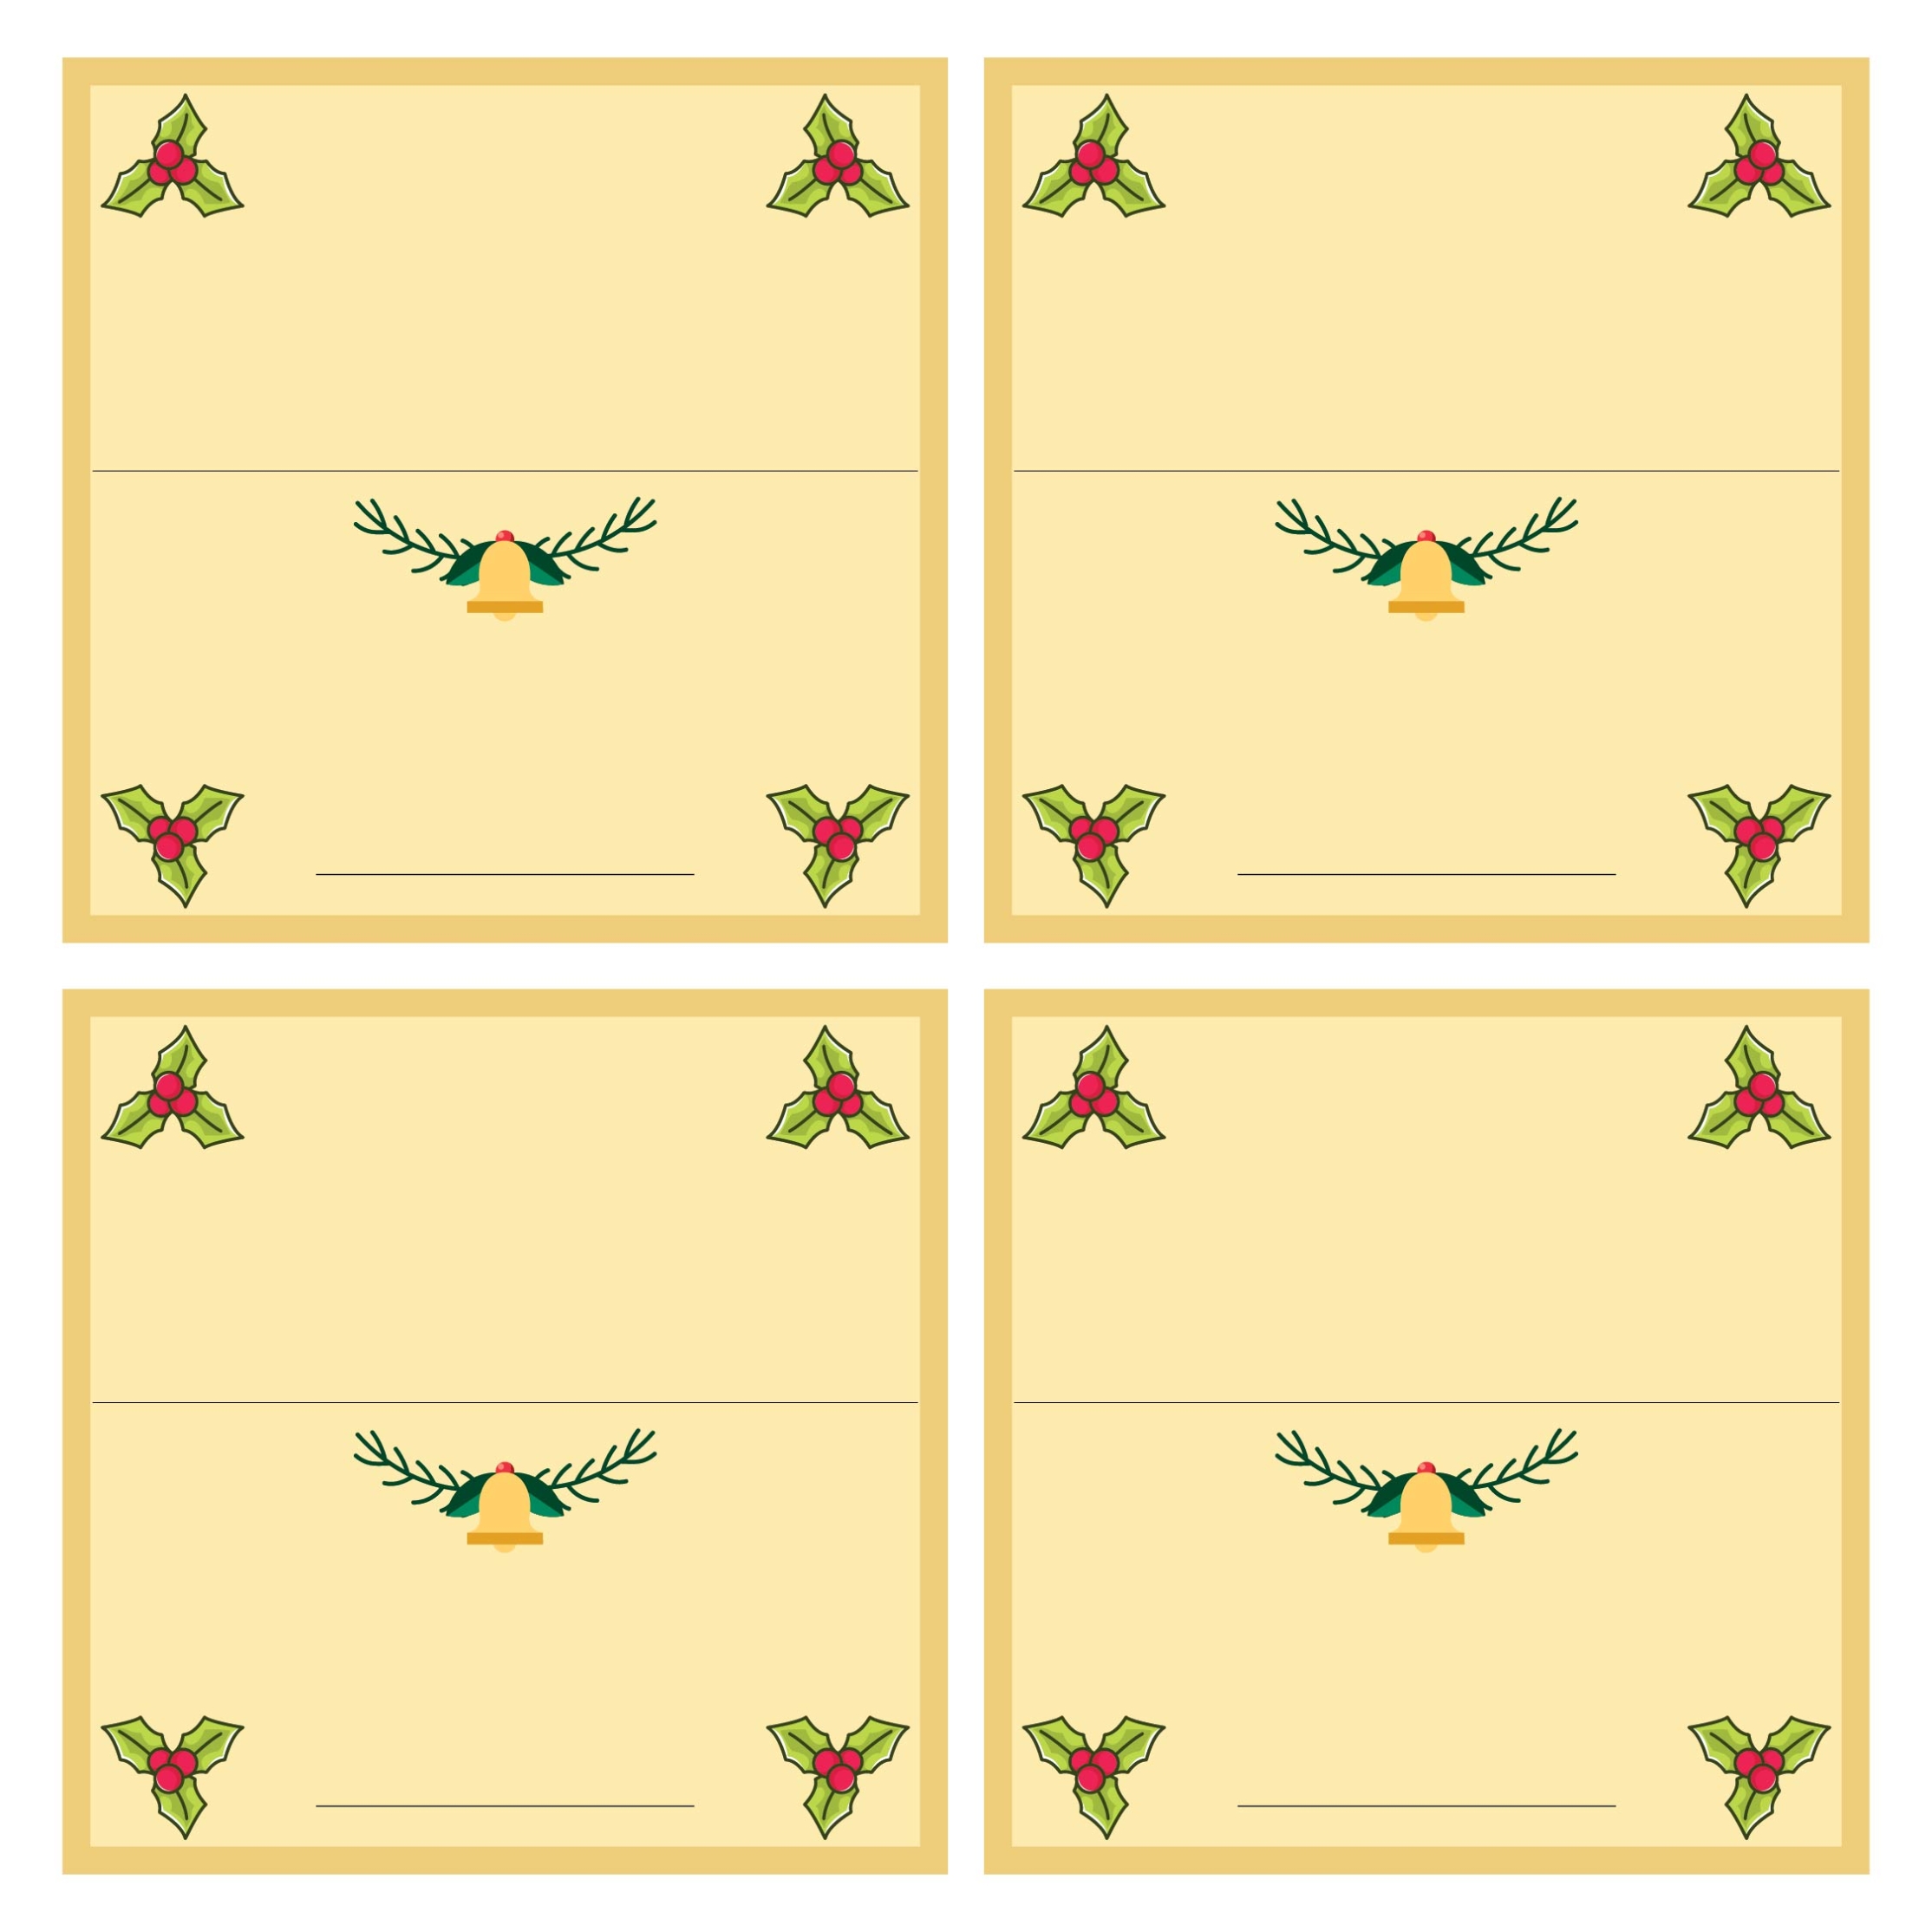 10 Best Free Printable Christmas Place Cards Template - Printablee regarding Free Downloadable Postcard Templates